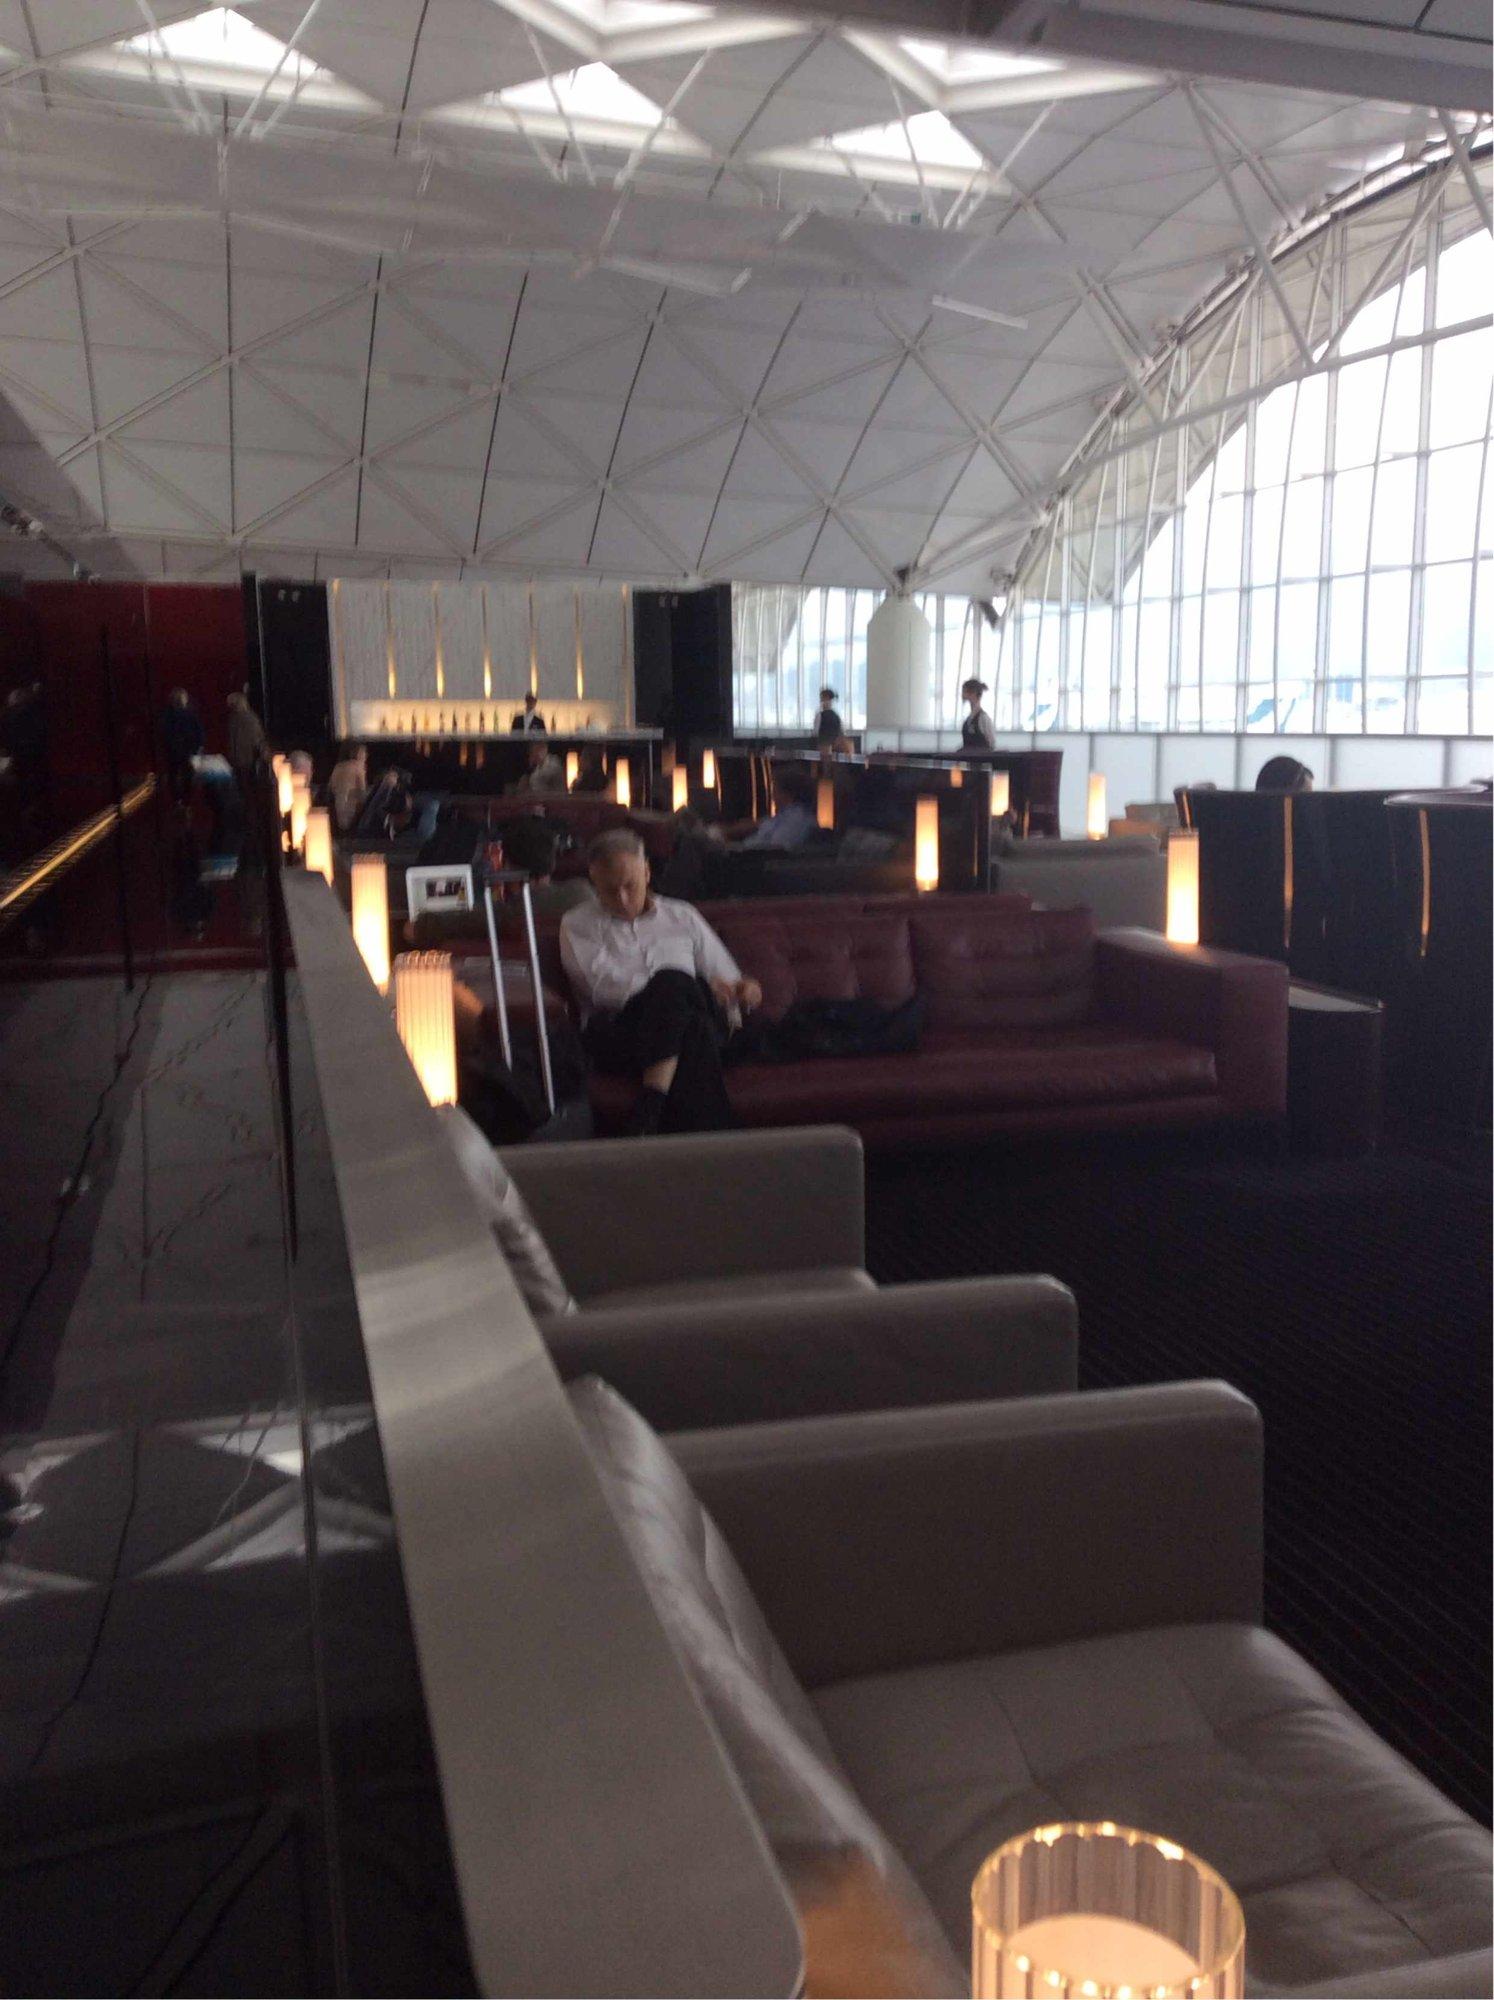 Cathay Pacific The Wing First Class Lounge image 26 of 89